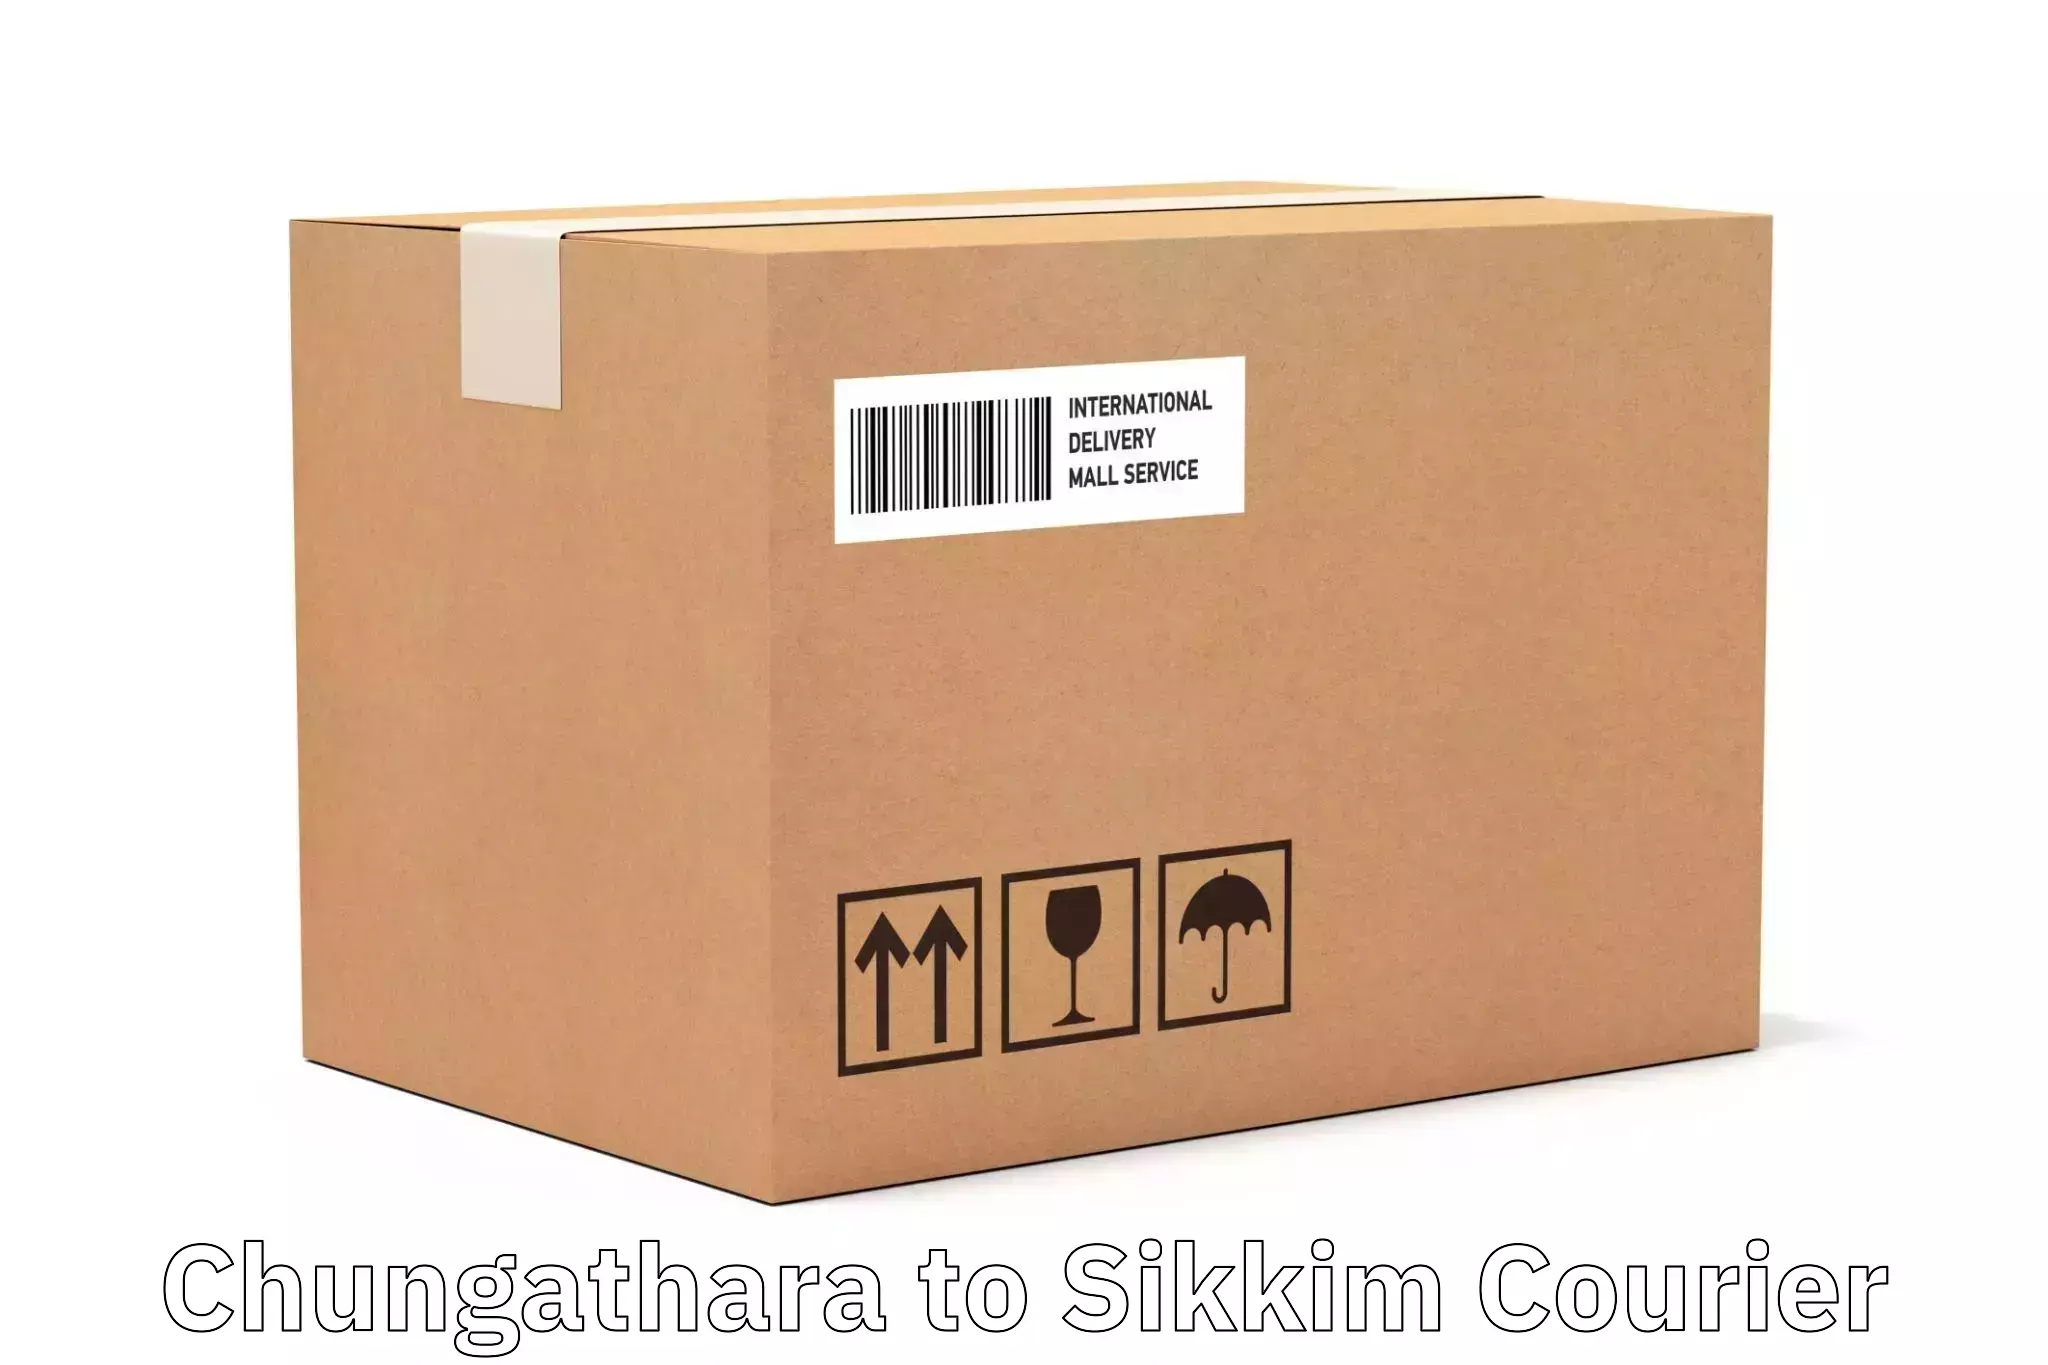 Business delivery service Chungathara to Singtam